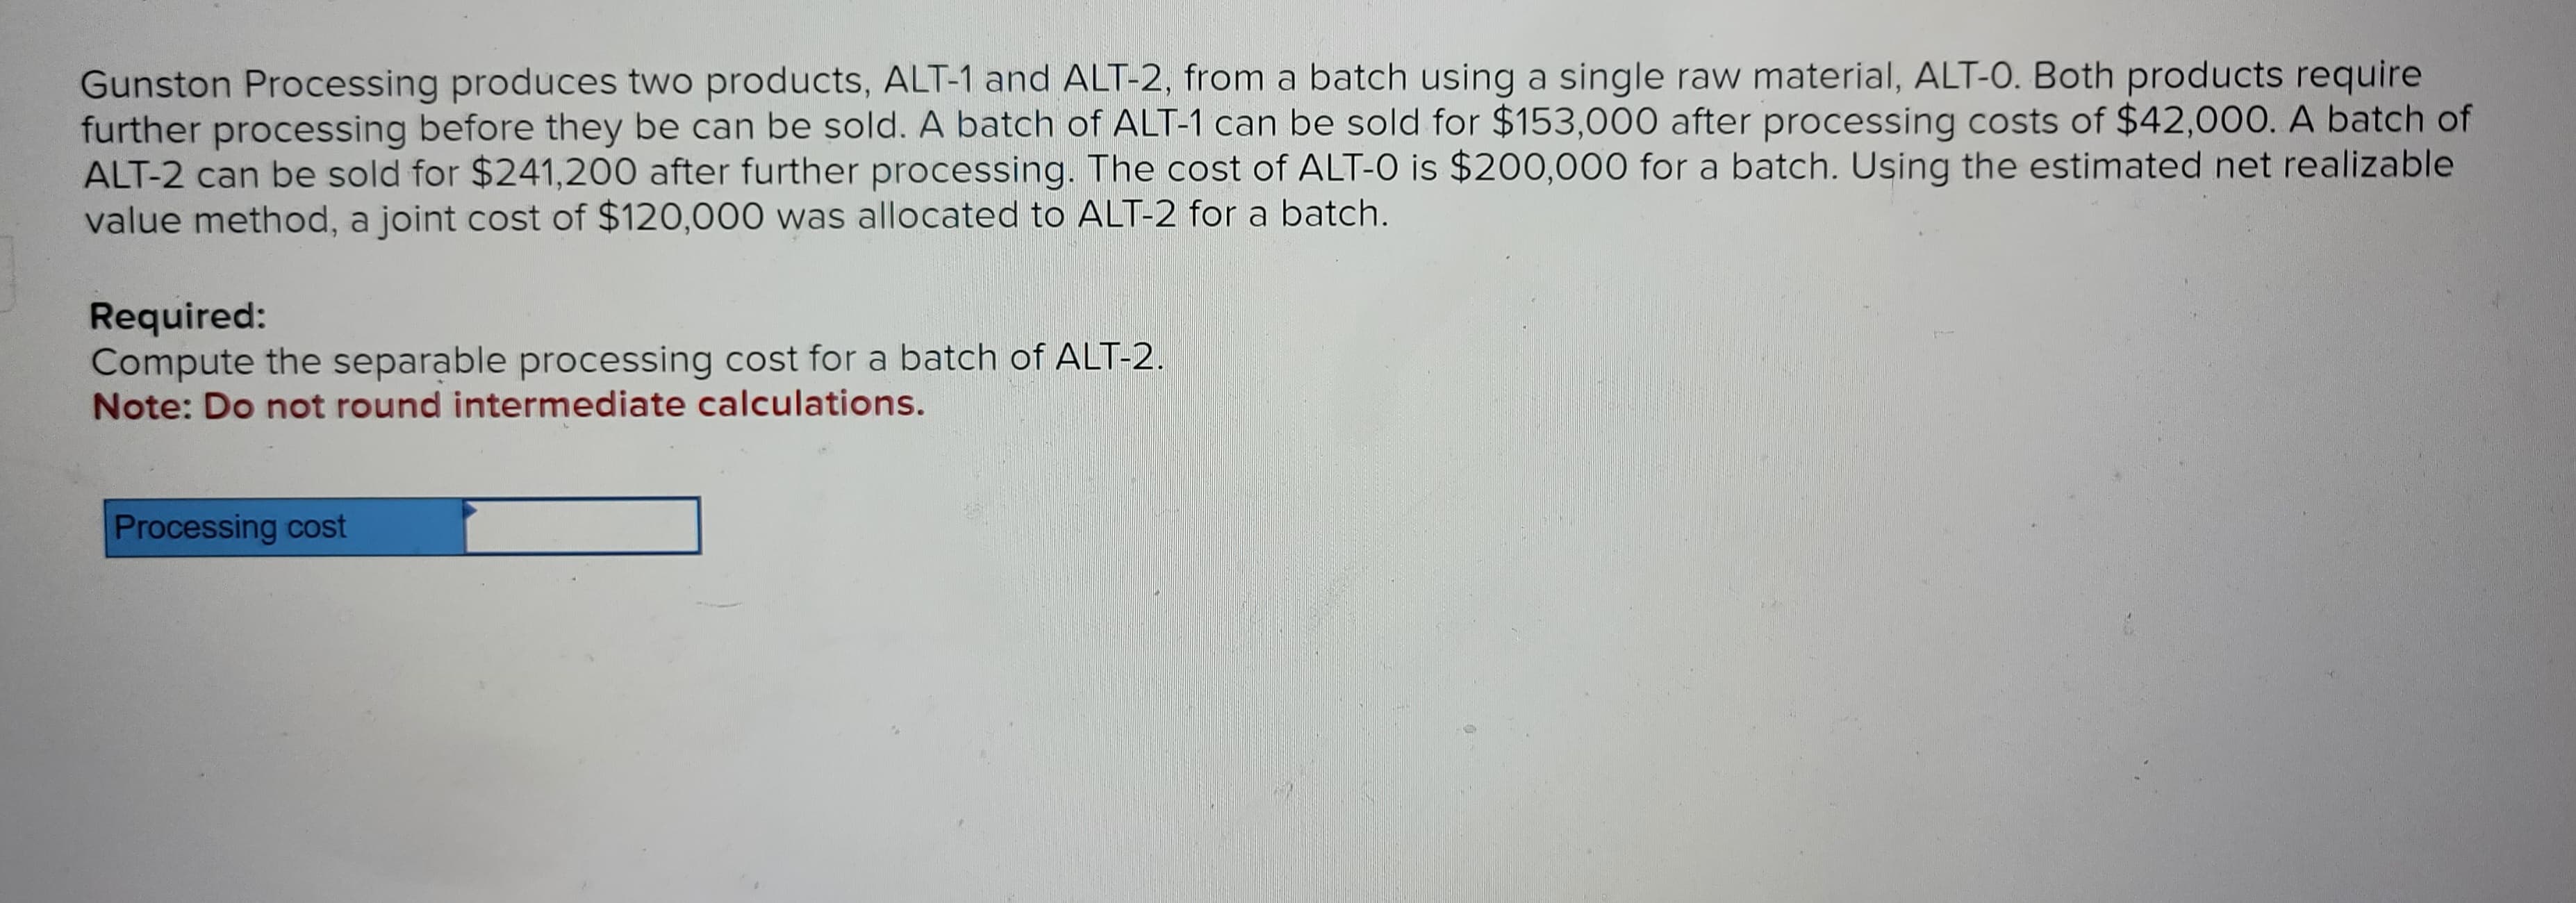 Gunston Processing produces two products, ALT-1 and ALT-2, from a batch using a single raw material, ALT-O. Both products require
further processing before they be can be sold. A batch of ALT-1 can be sold for $153,000 after processing costs of $42,000. A batch of
ALT-2 can be sold for $241,200 after further processing. The cost of ALT-O is $200,000 for a batch. Using the estimated net realizable
value method, a joint cost of $120,000 was allocated to ALT-2 for a batch.
Required:
Compute the separable processing cost for a batch of ALT-2.
Note: Do not round intermediate calculations.
Processing cost